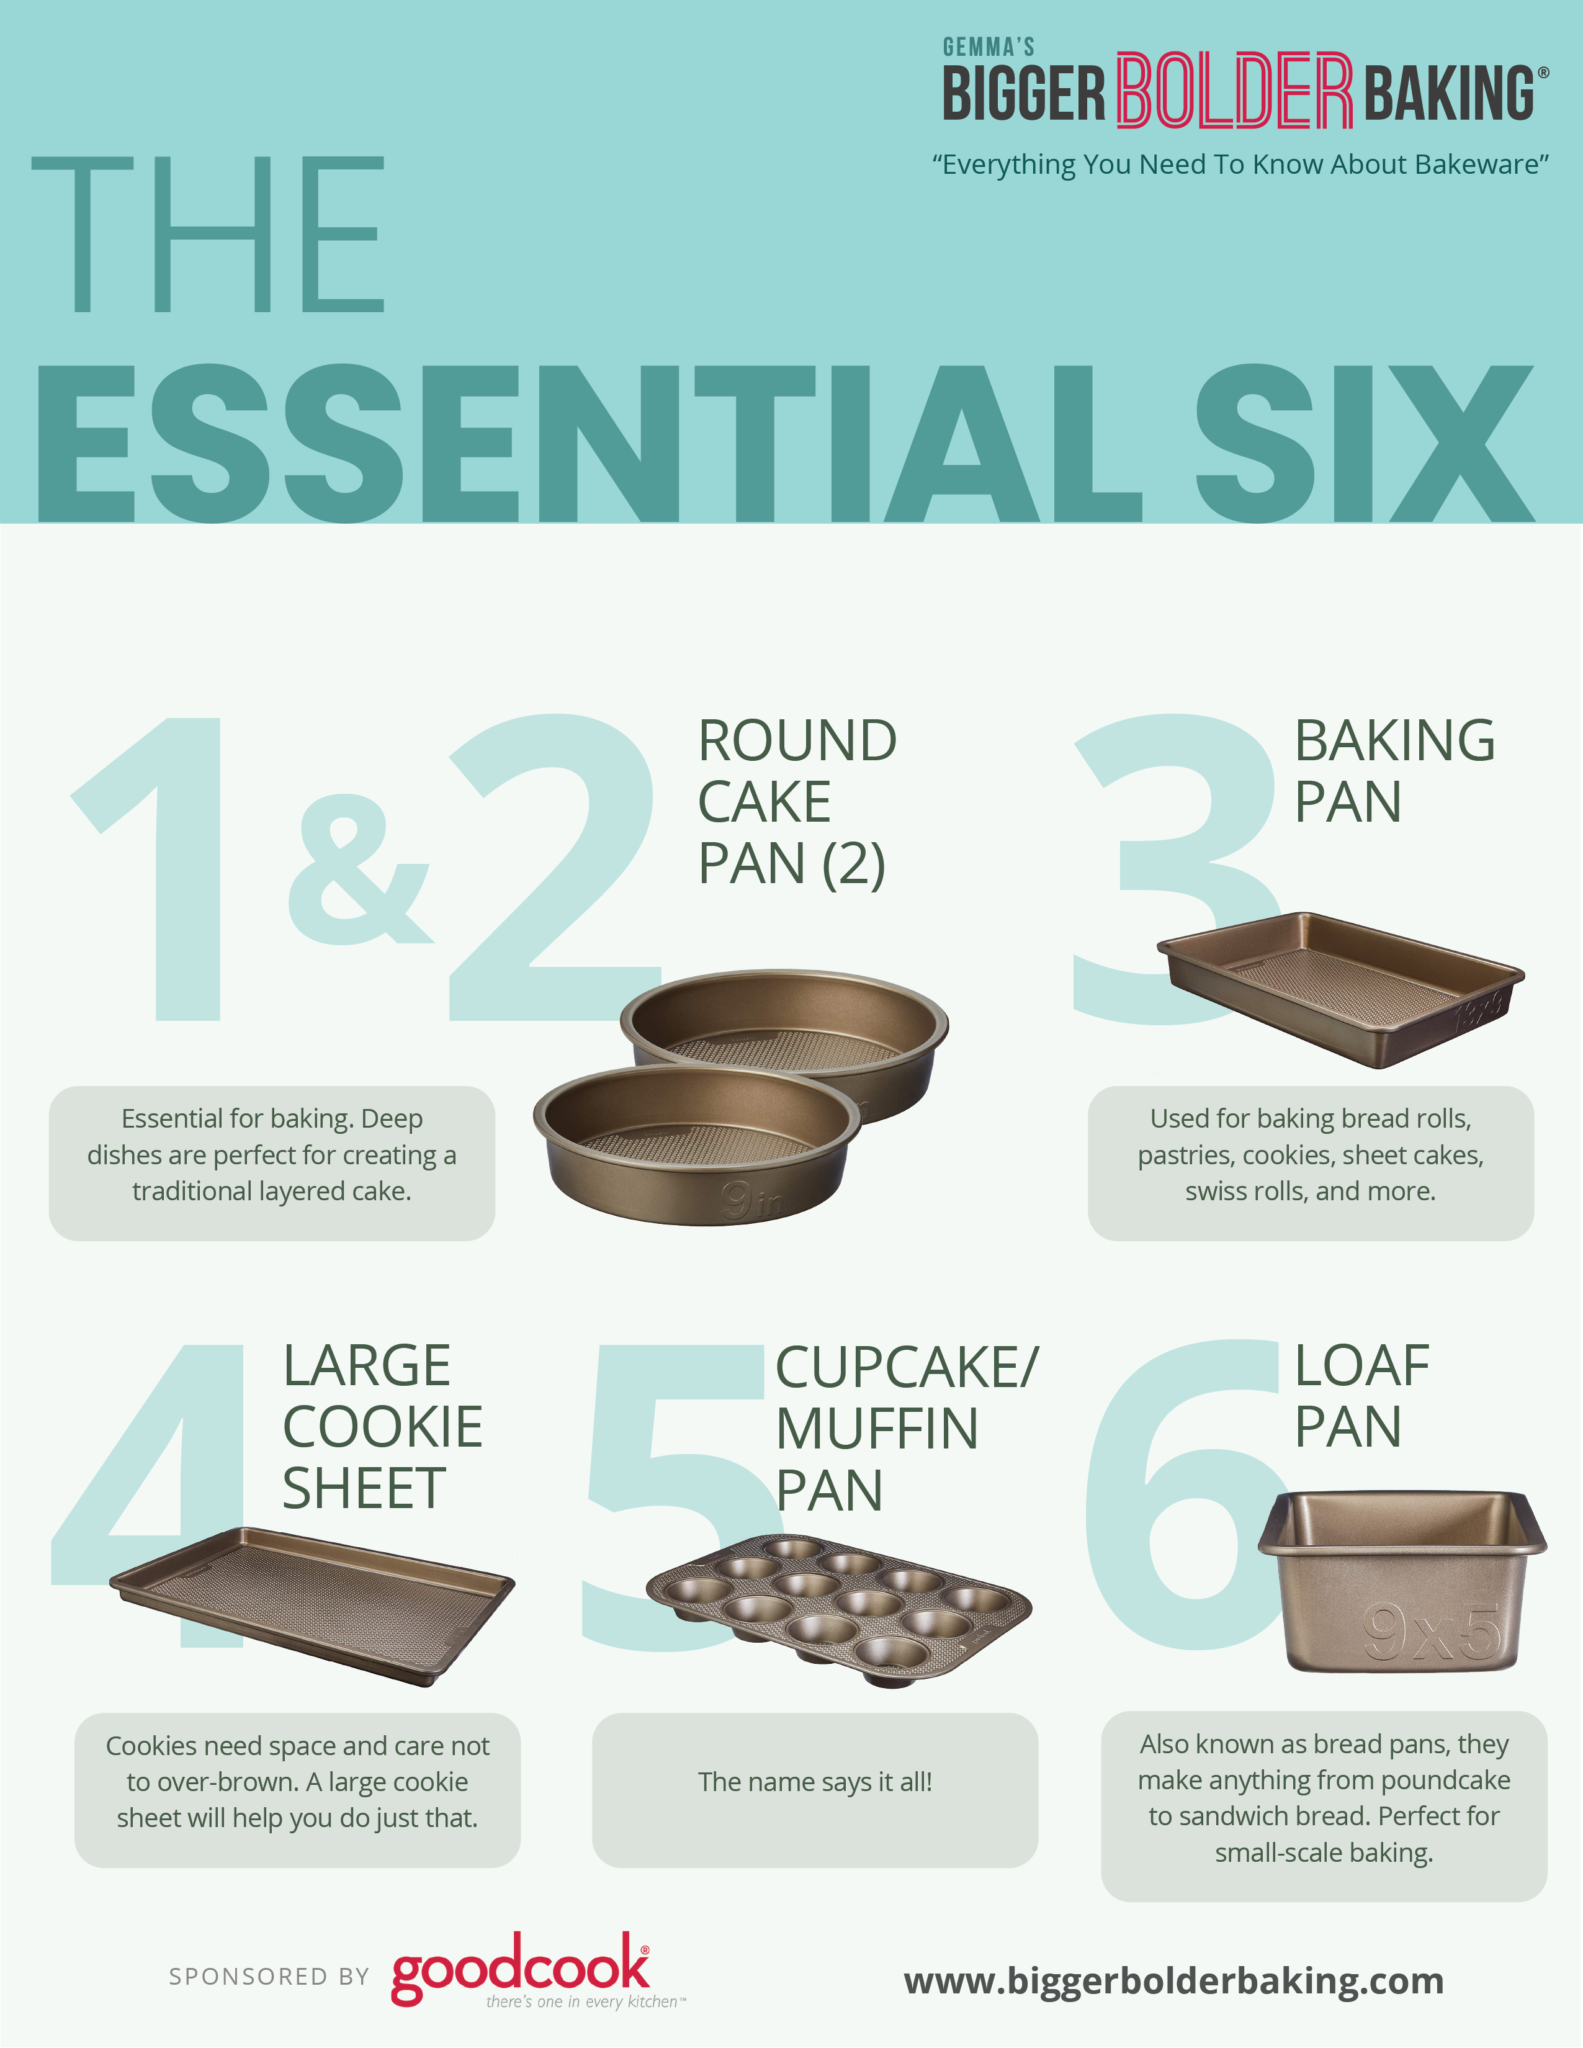 The essential six pieces of bakeware every baker needs.